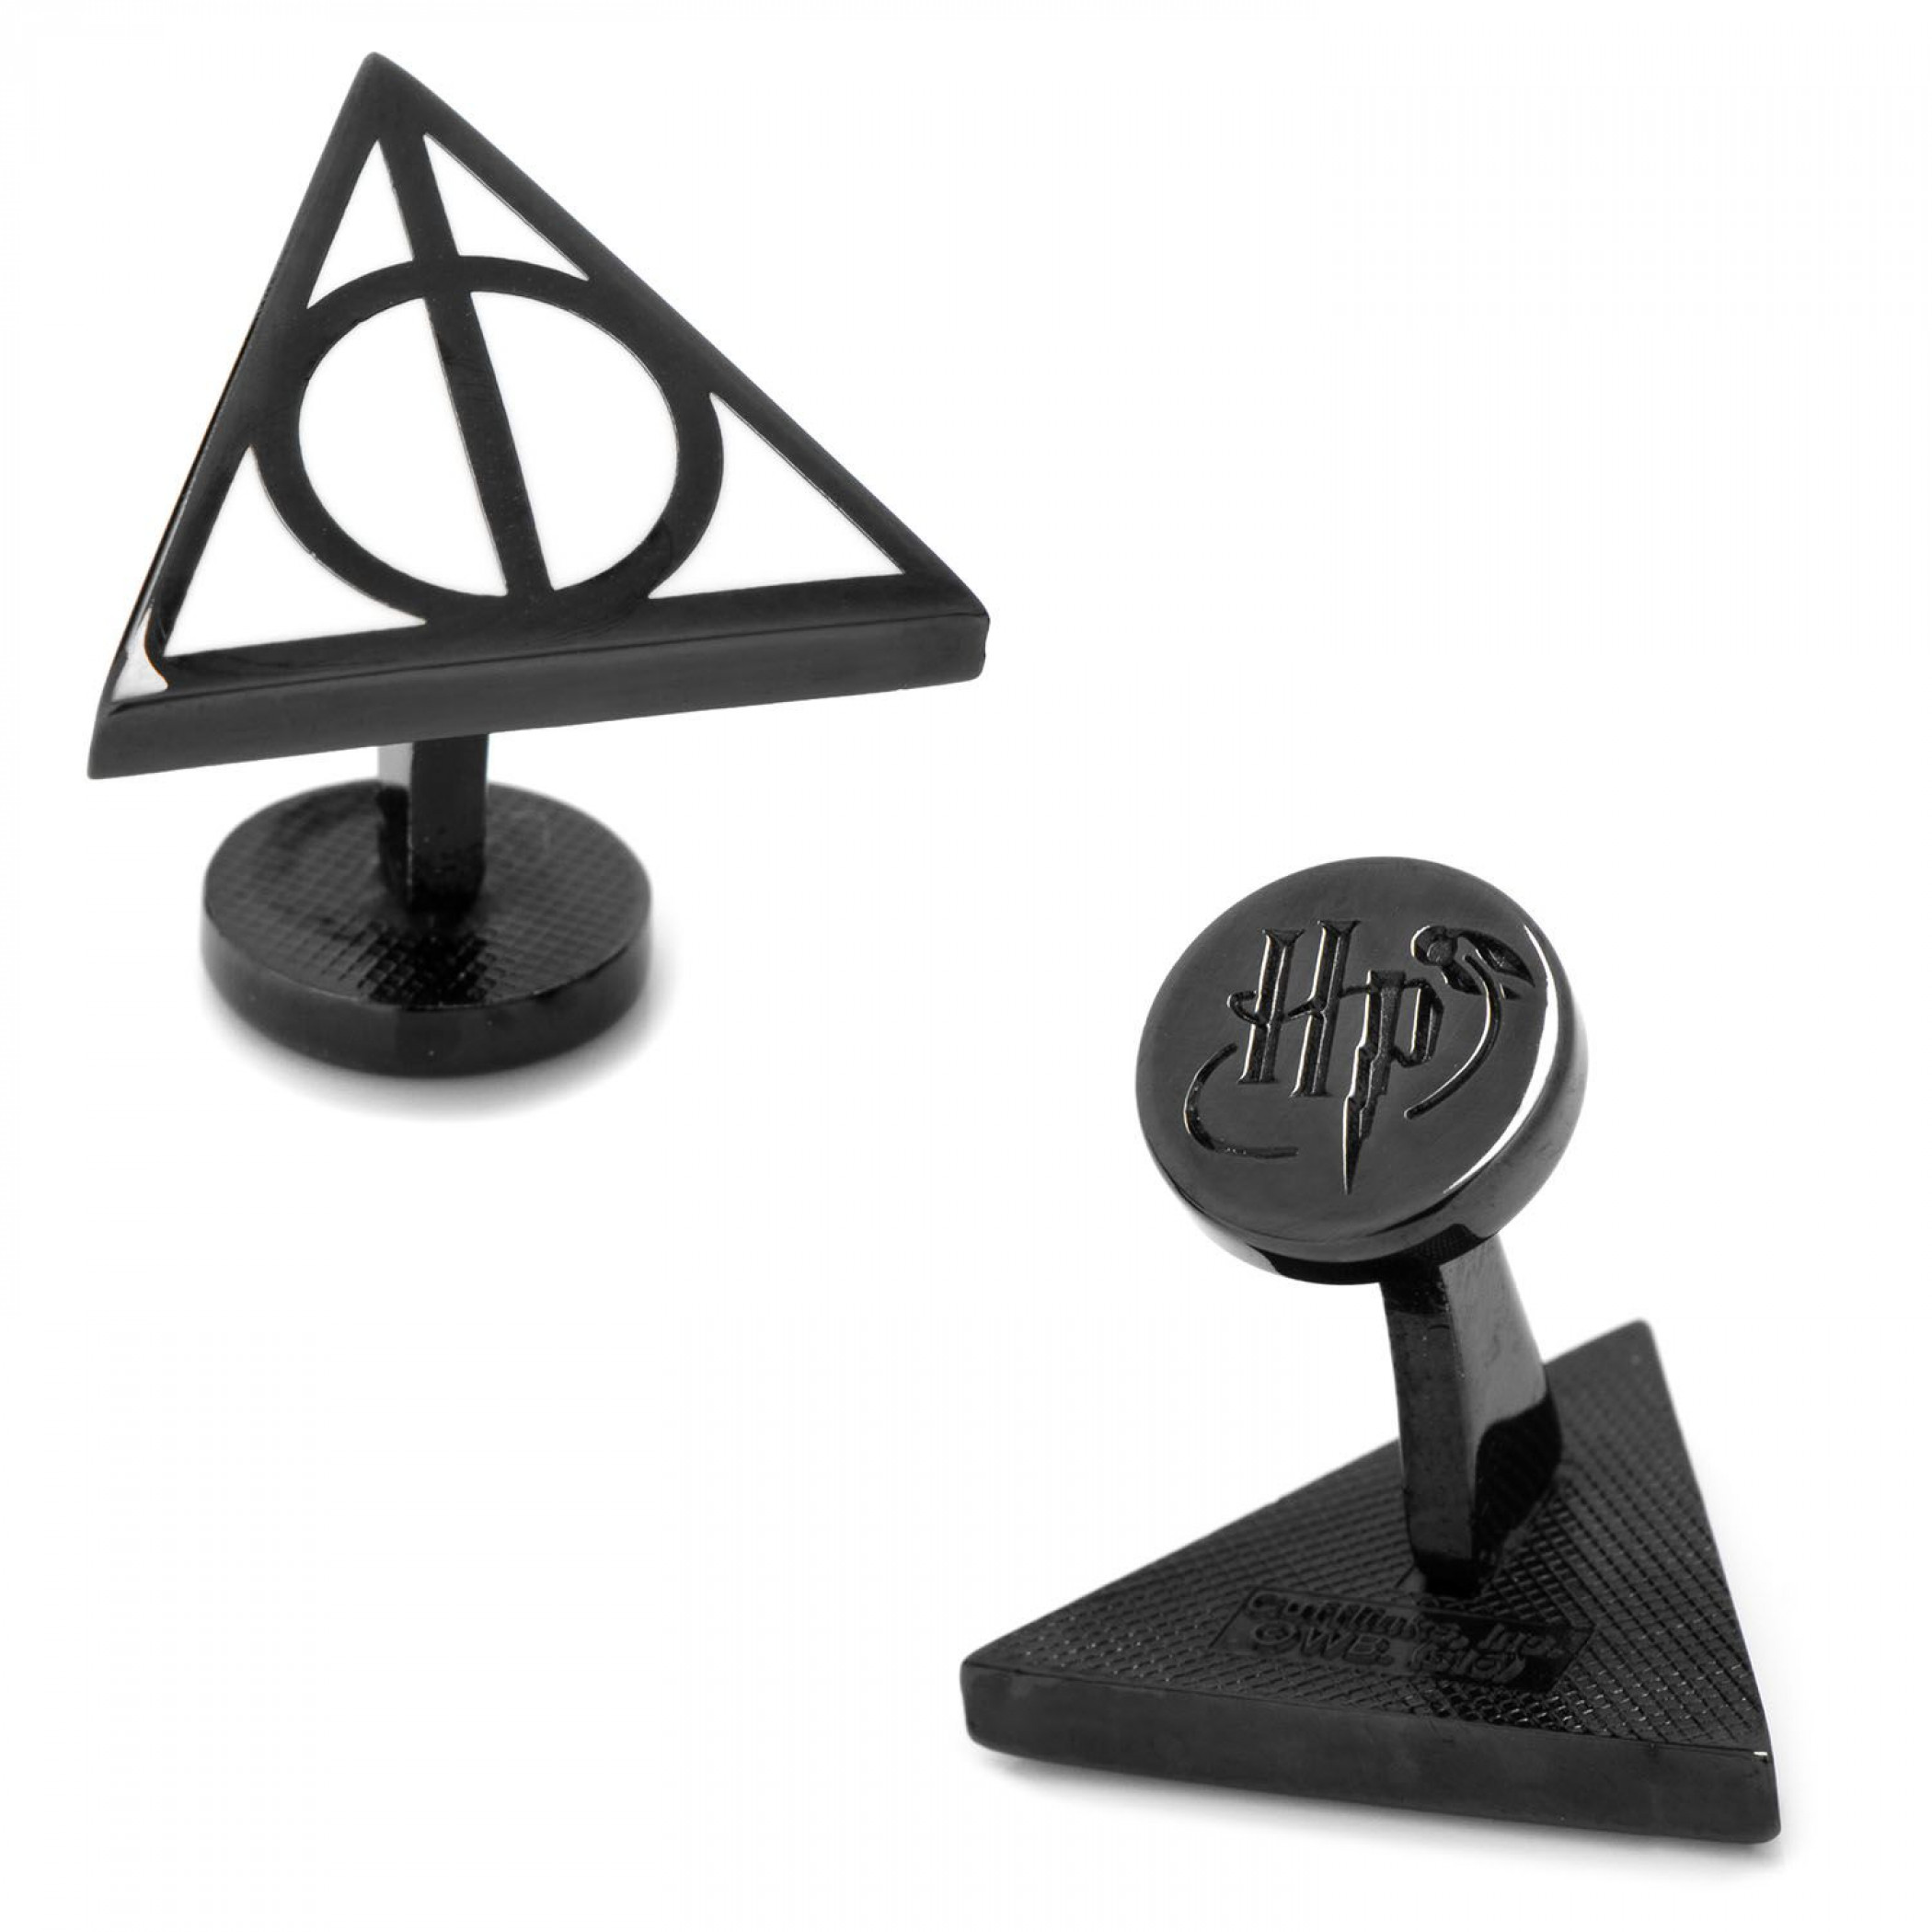 Harry Potter and the Deathly Hallows Cufflinks